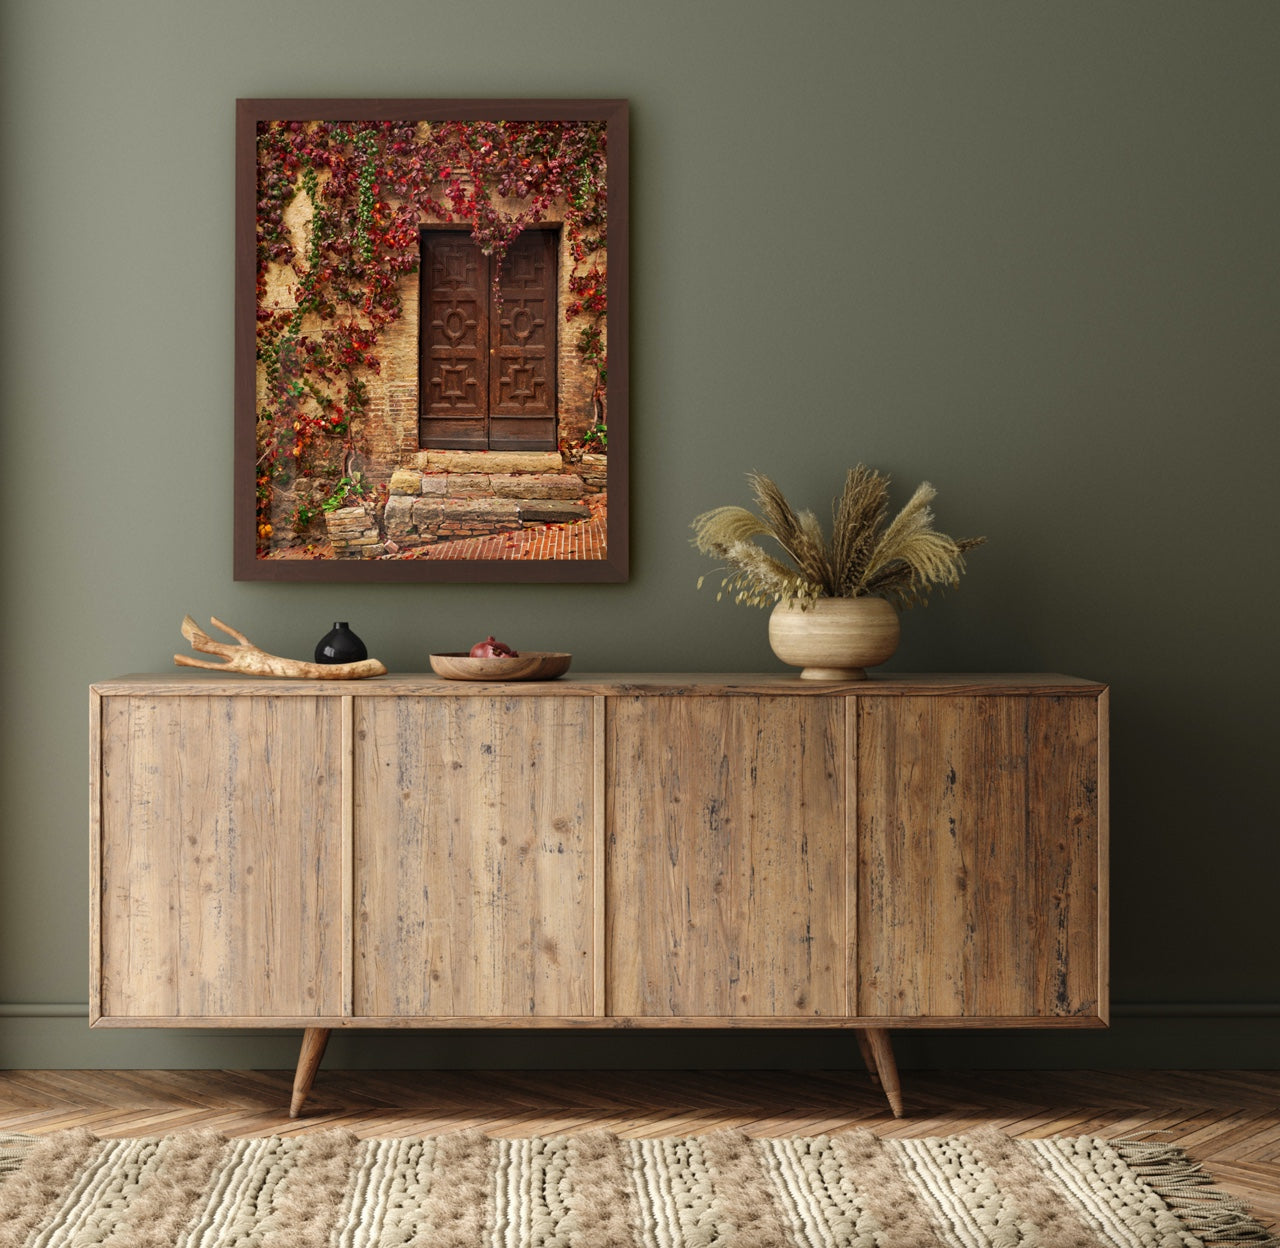 Framed photography with fall leaves over dresser